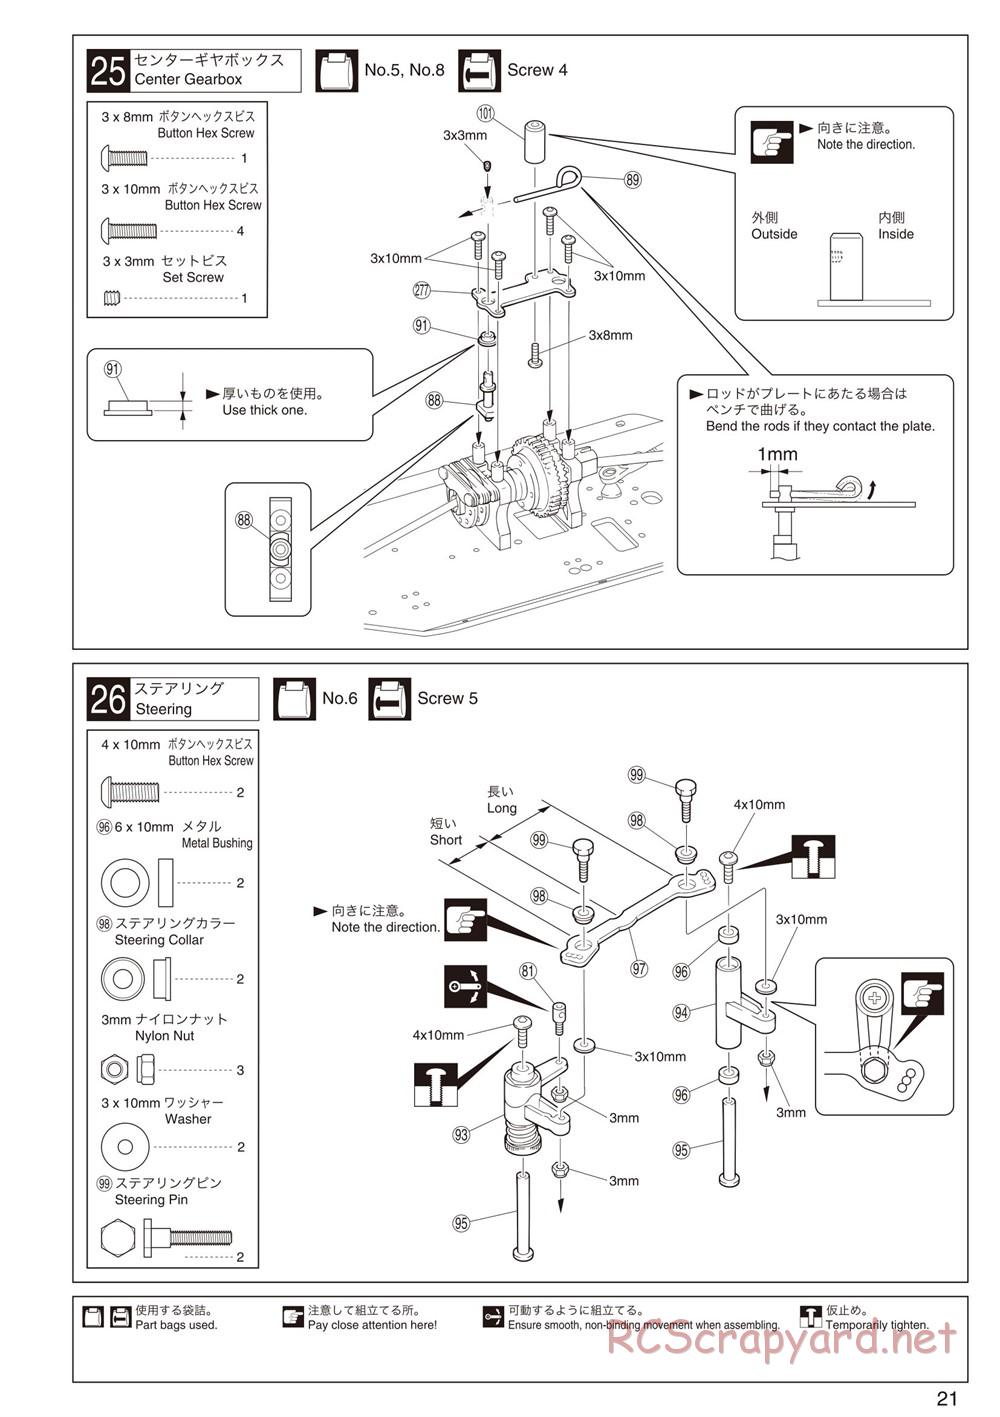 Kyosho - Inferno GT2 - Manual - Page 21